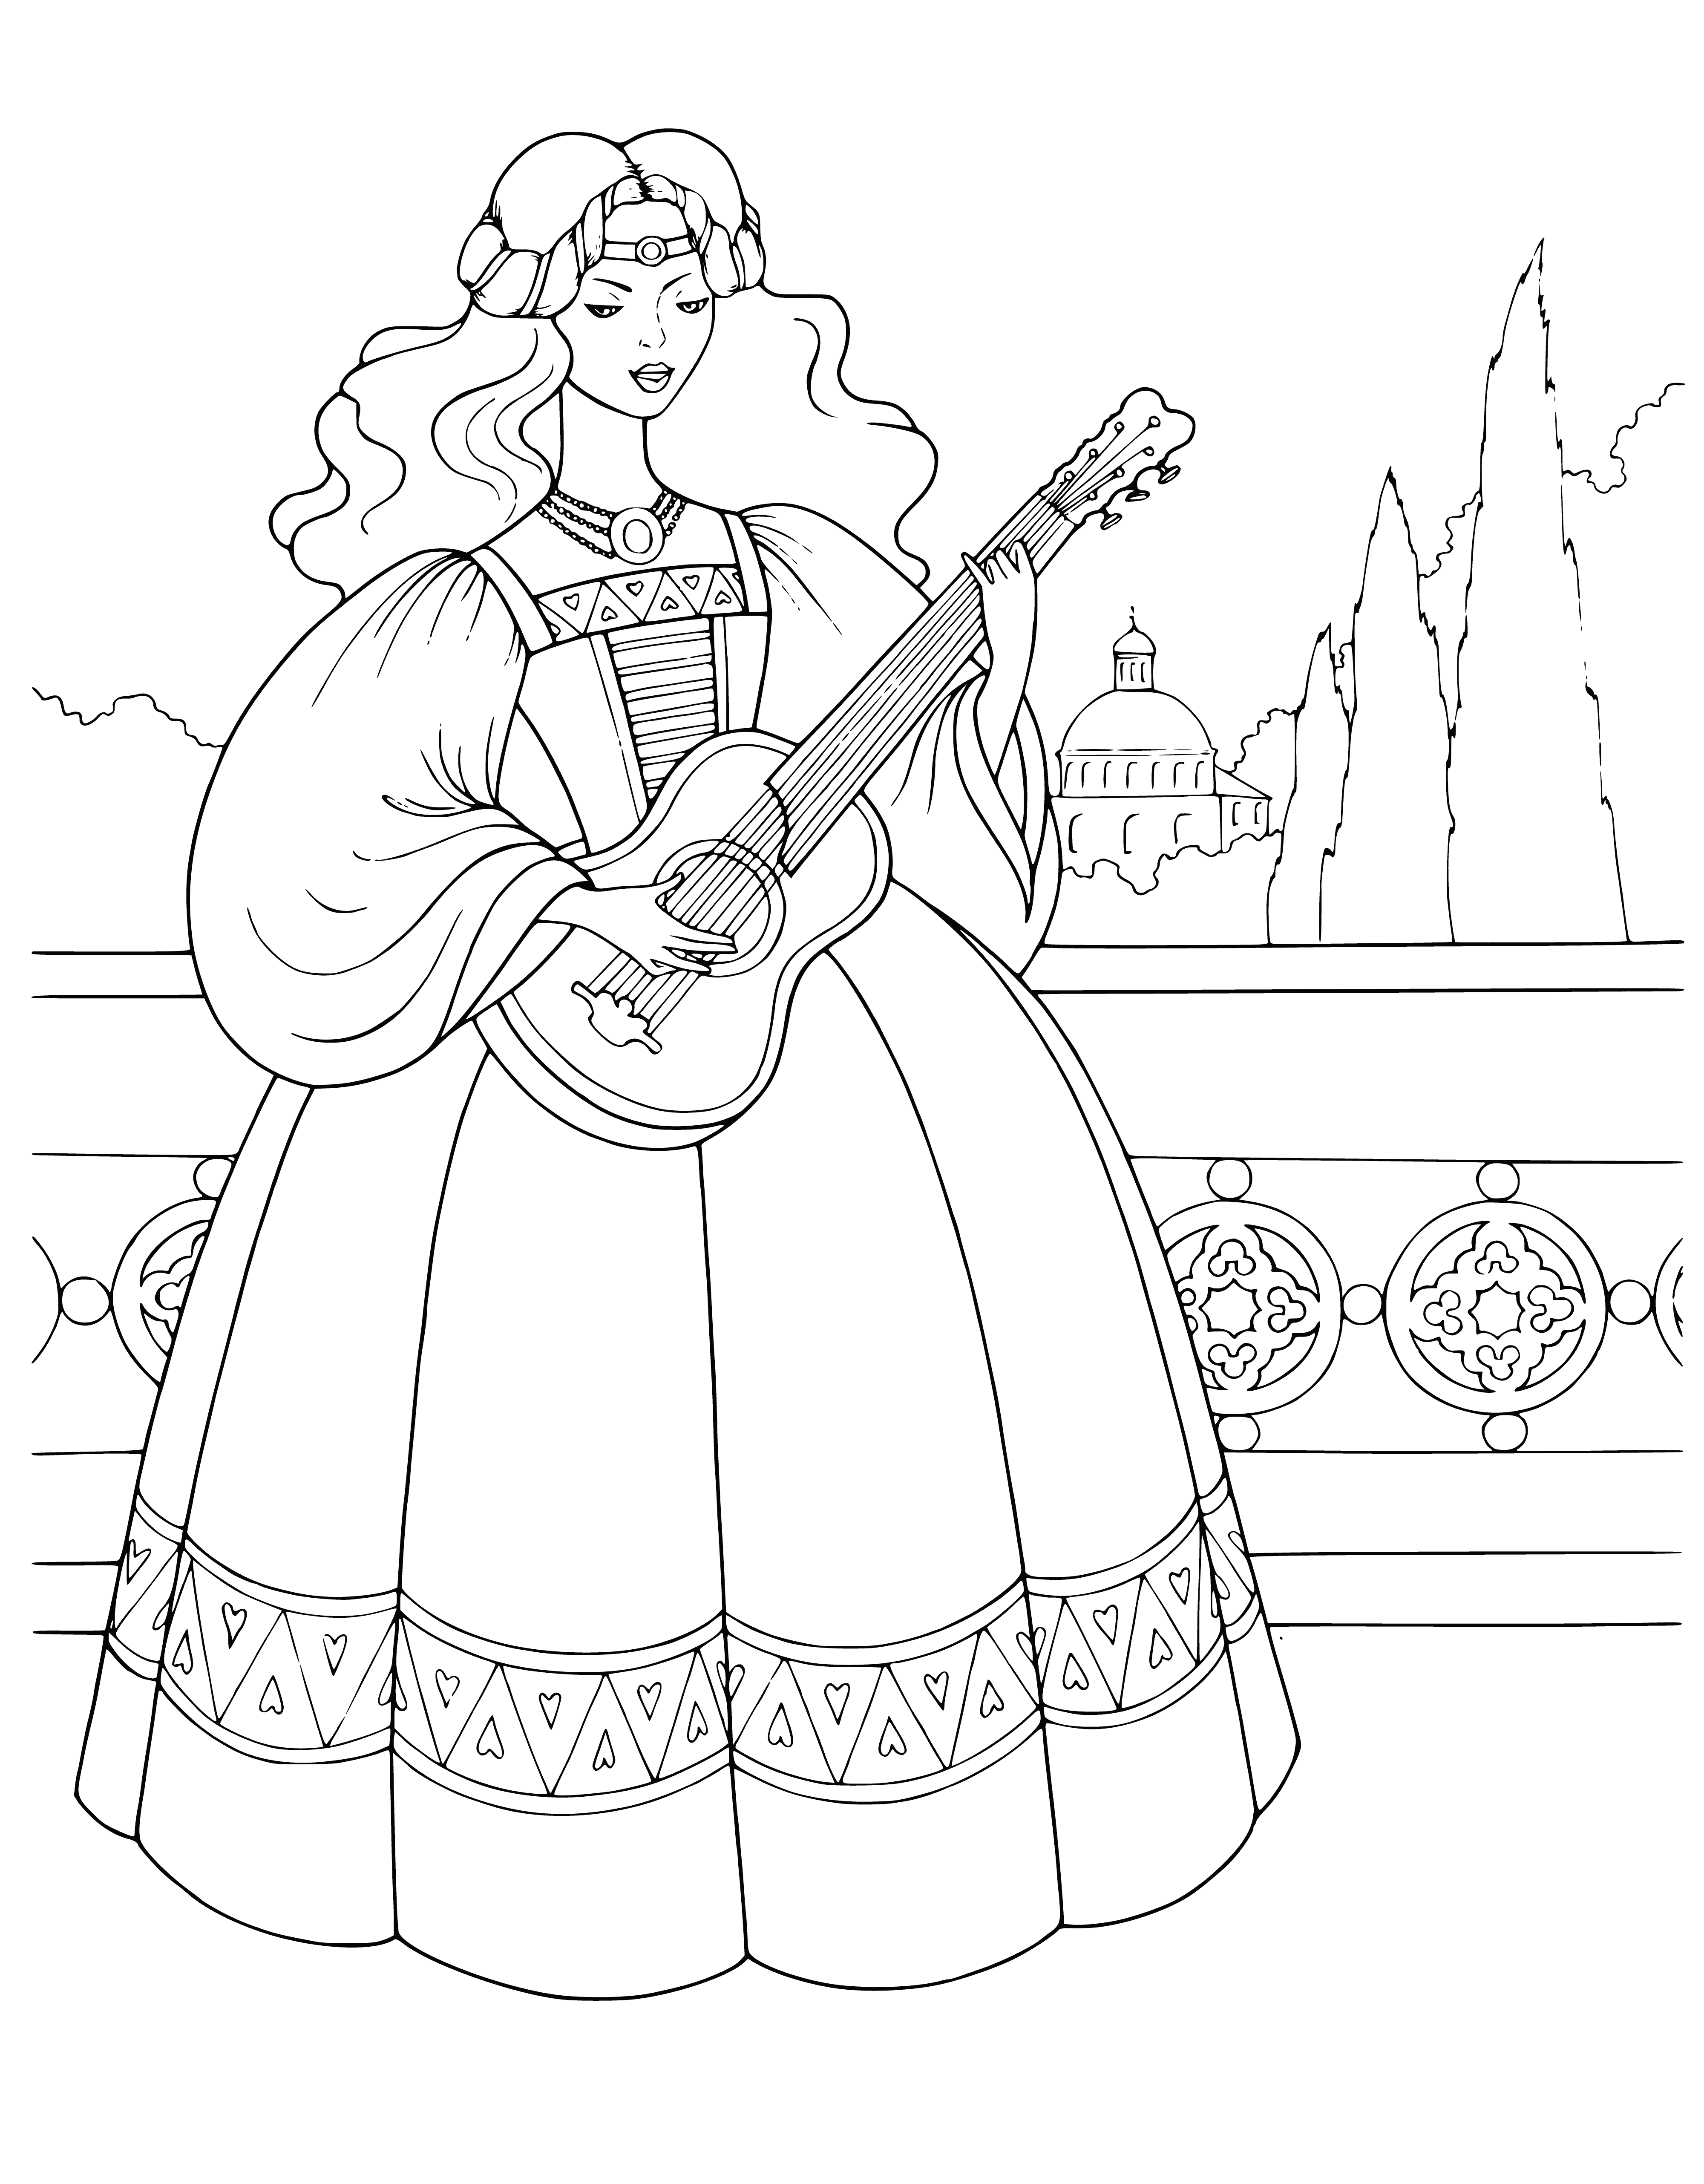 coloring page: Girl playing pink guitar in blue dress with blonde hair.